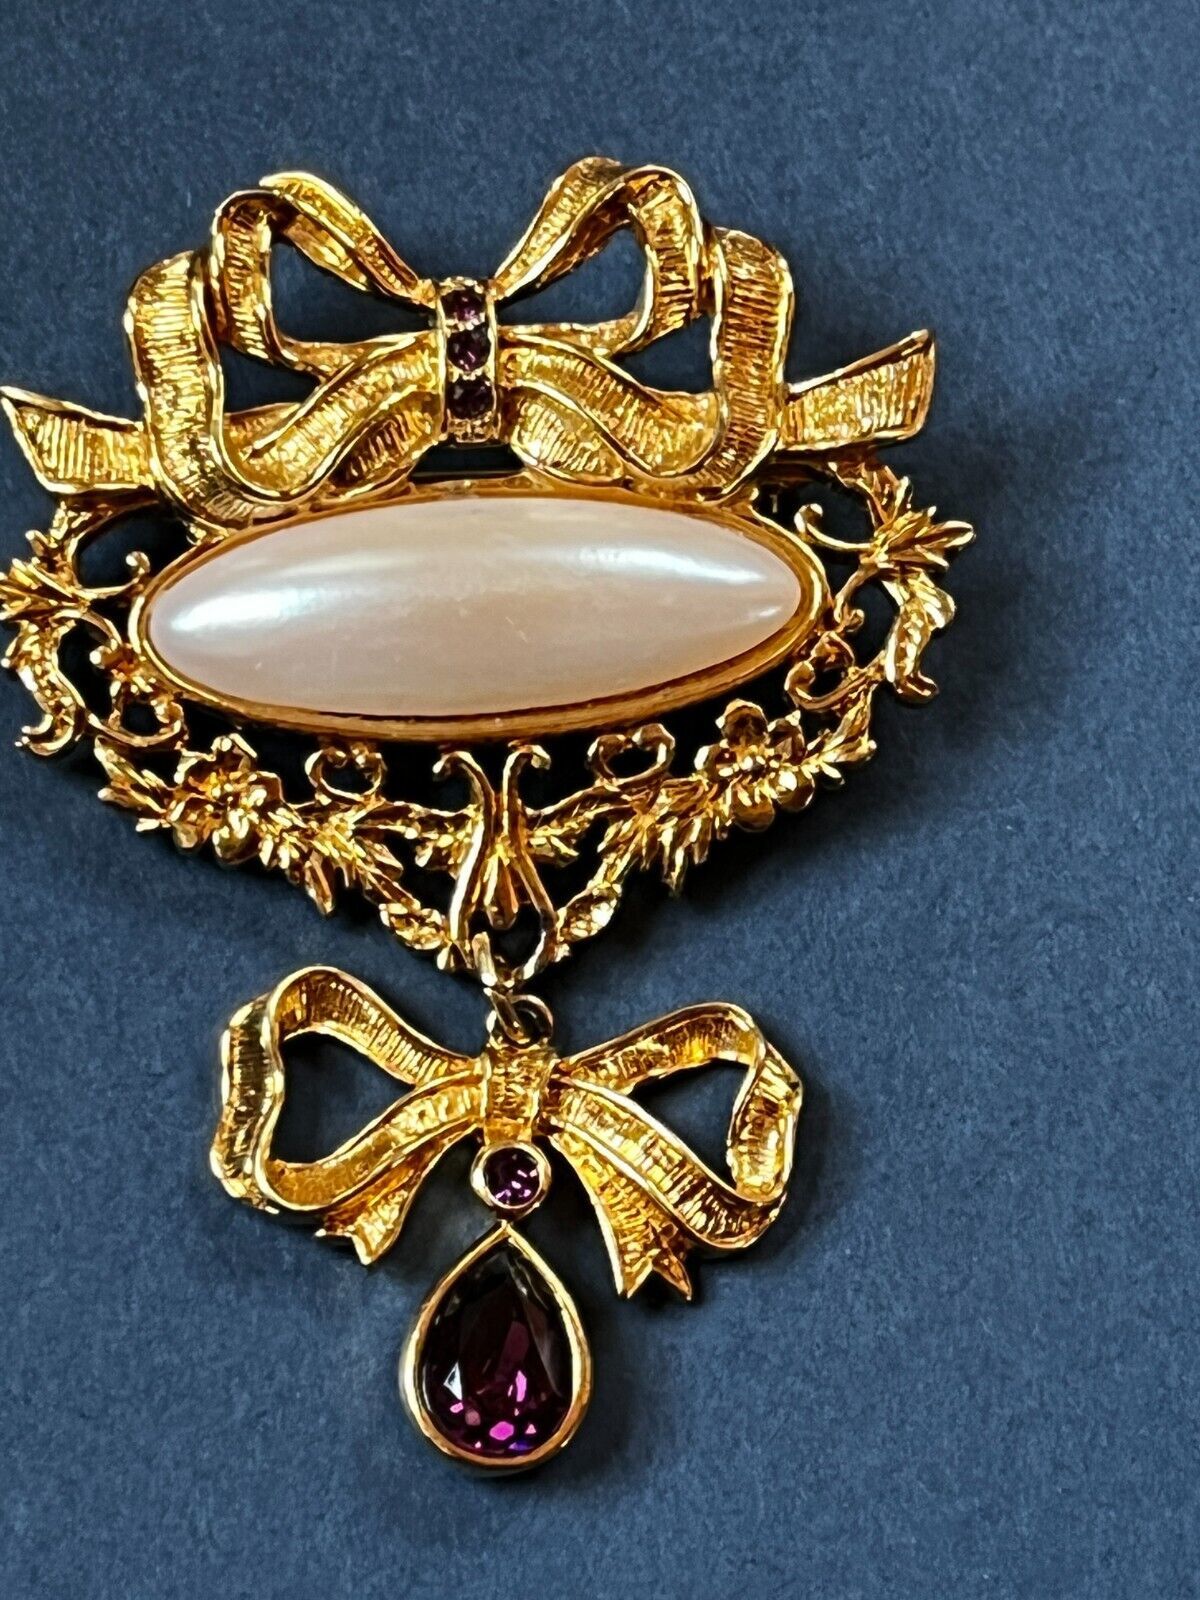 Vintage Avon Marked Faux Mabe Pinched Oval Pearl in Ornate Goldtone Frame w Ribb - $13.09